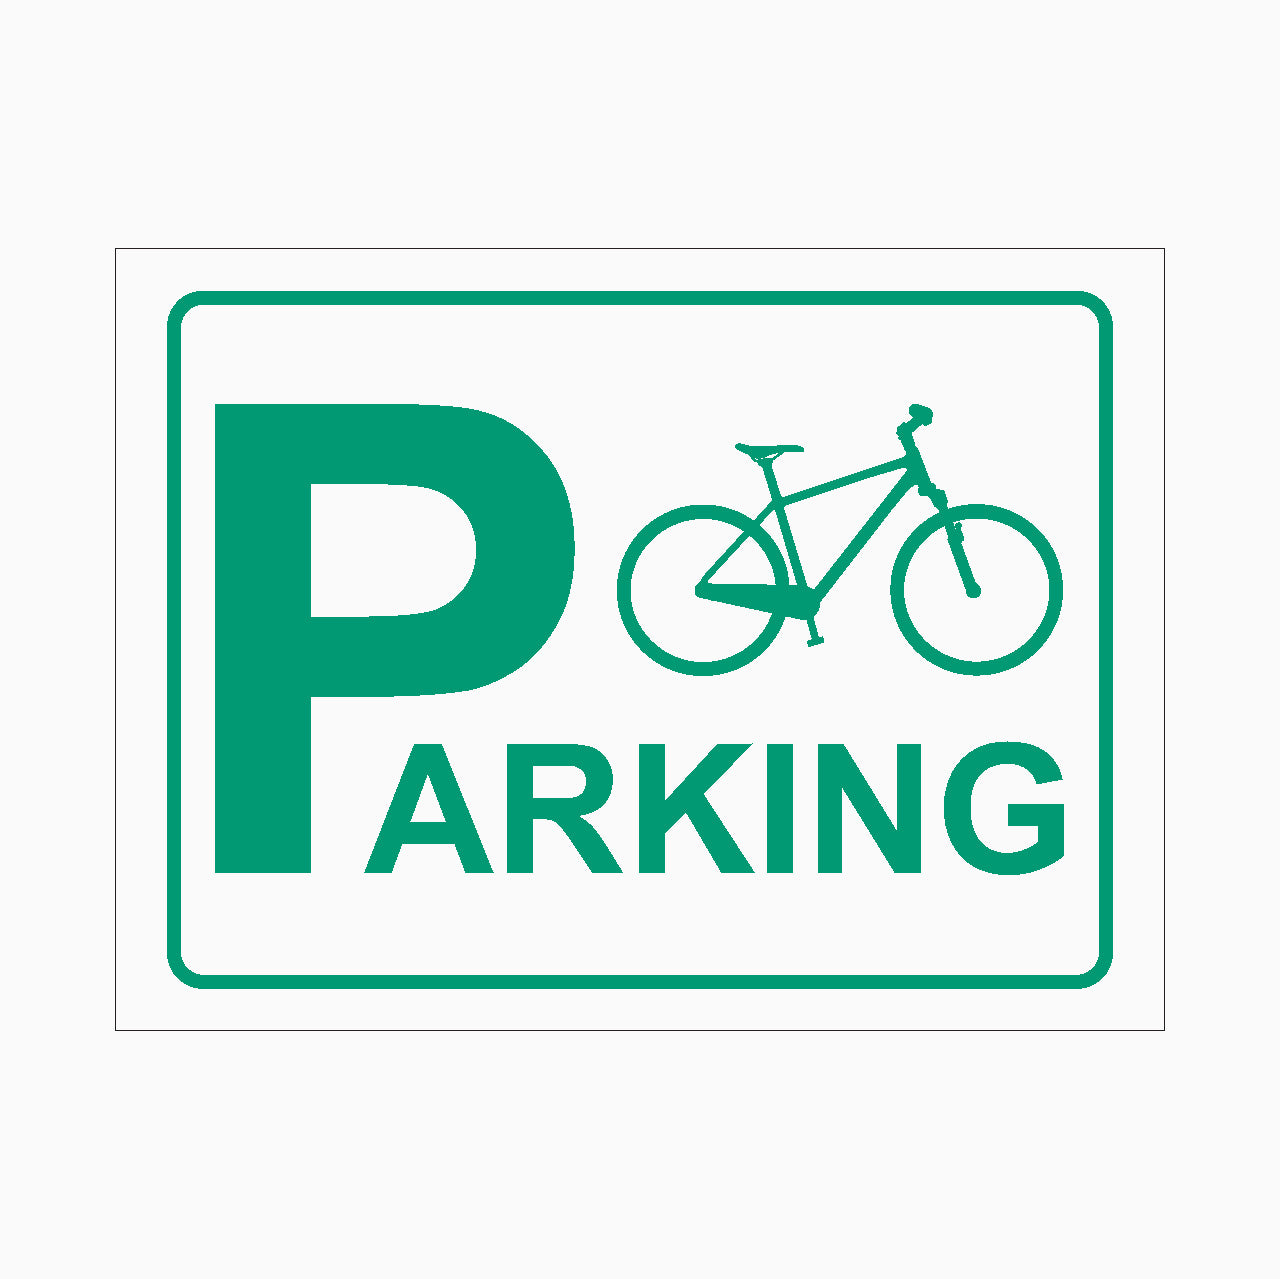 BICYCLE PARKING SIGN - Parking sign